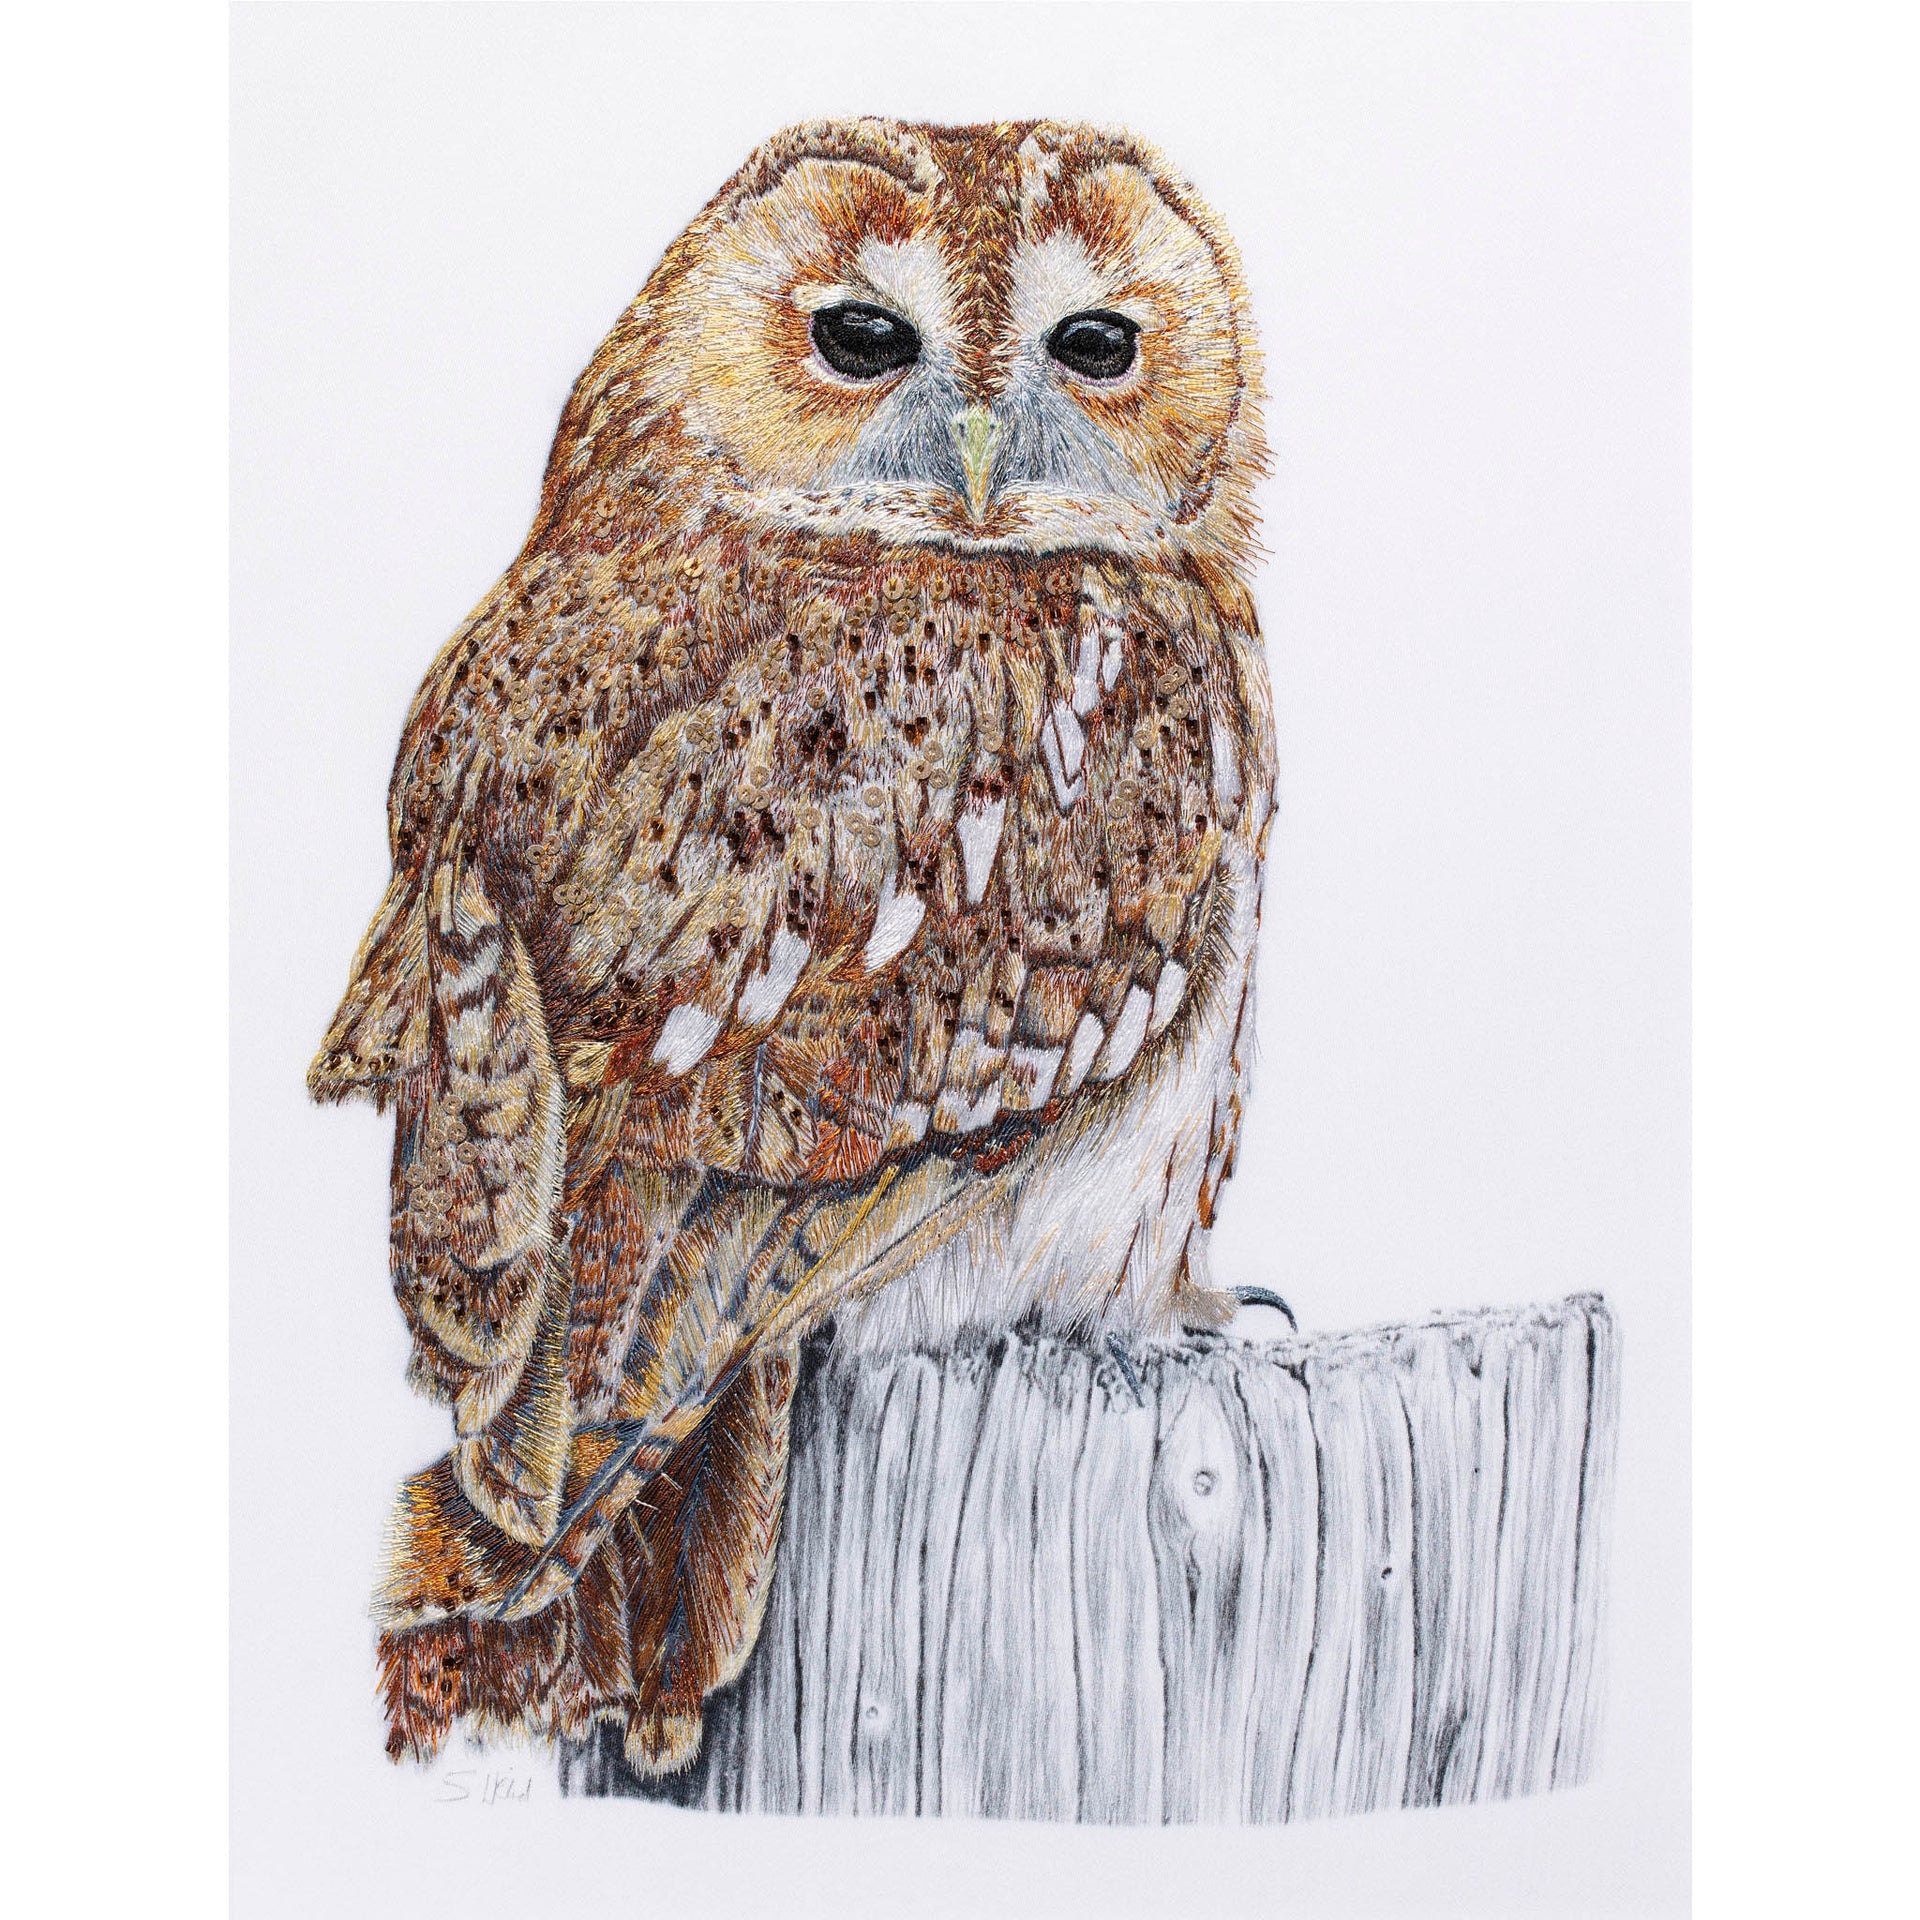 Tawny owl hand embroidered artwork